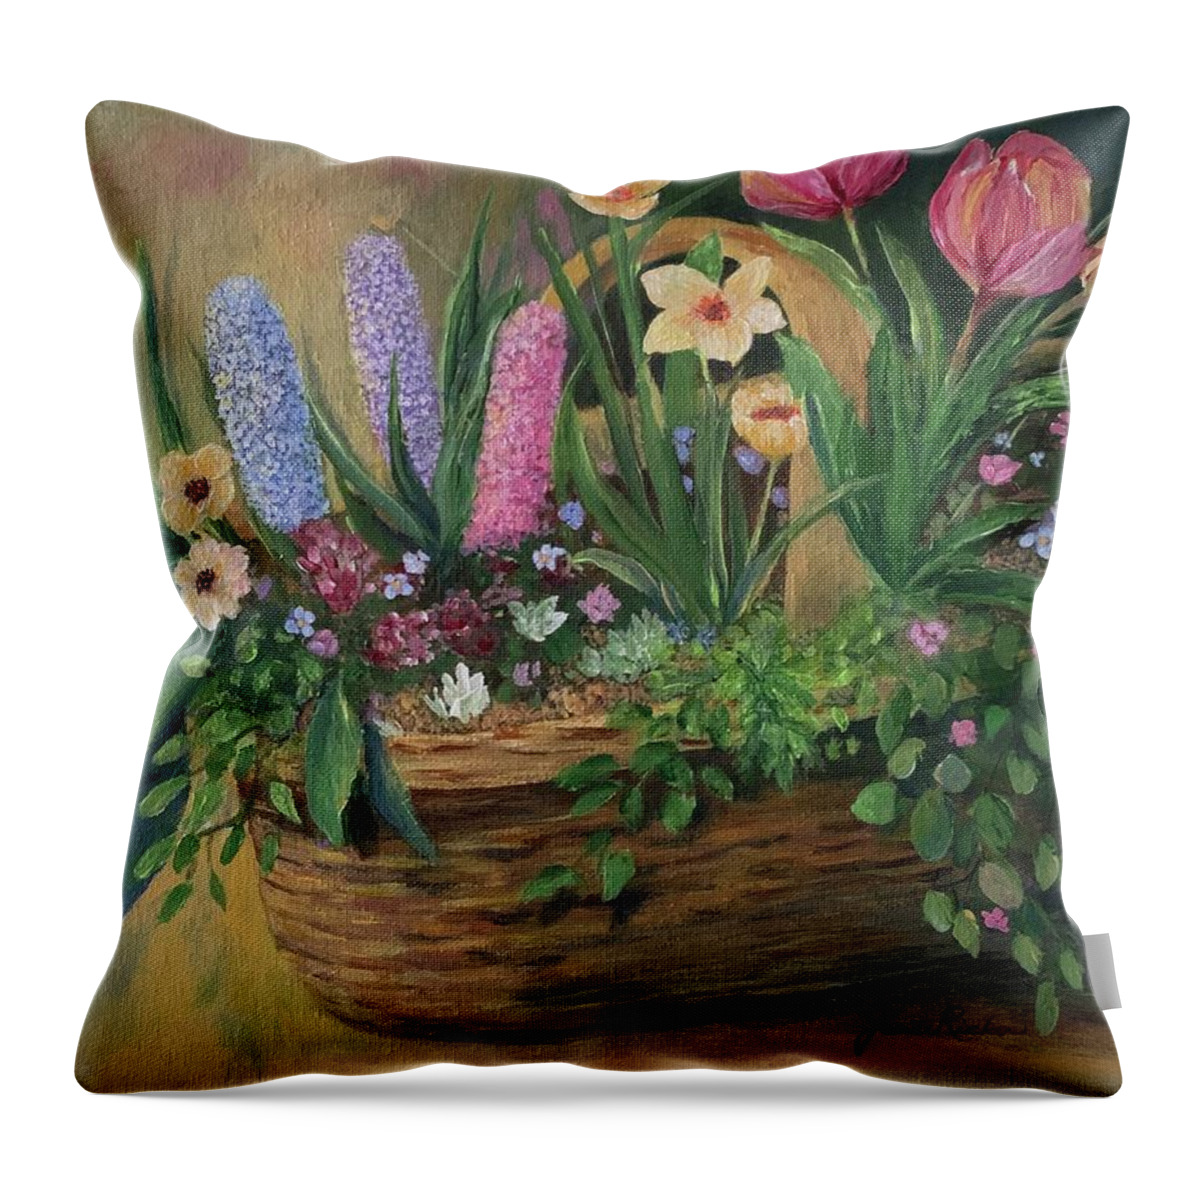 Spring Throw Pillow featuring the painting Spring Basket by Jane Ricker